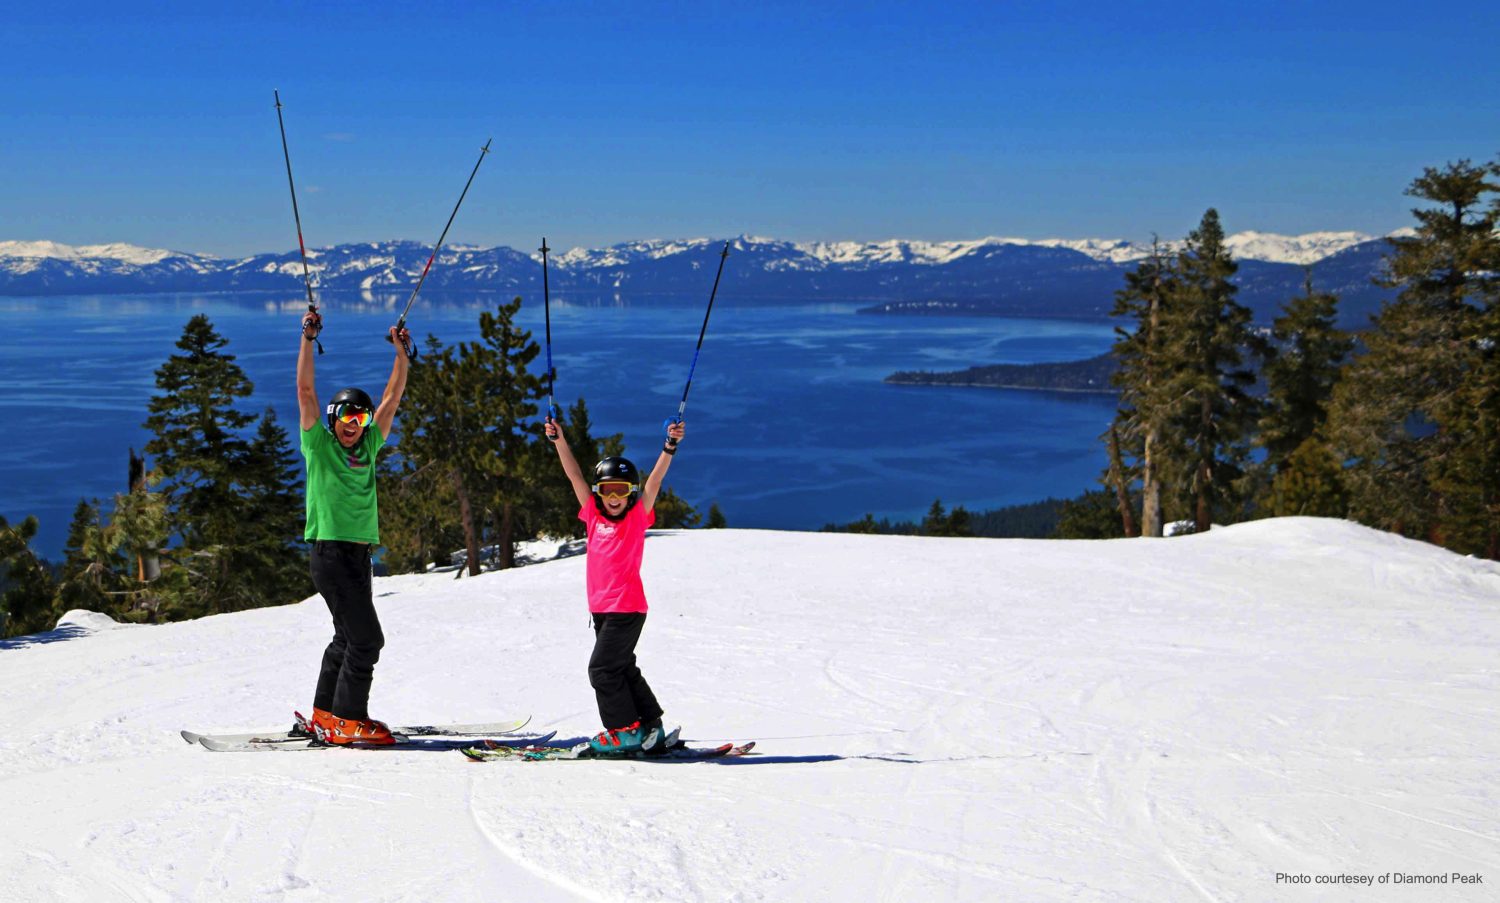 dad and son skiing during the sping in the tahoe lake area e1684215958265